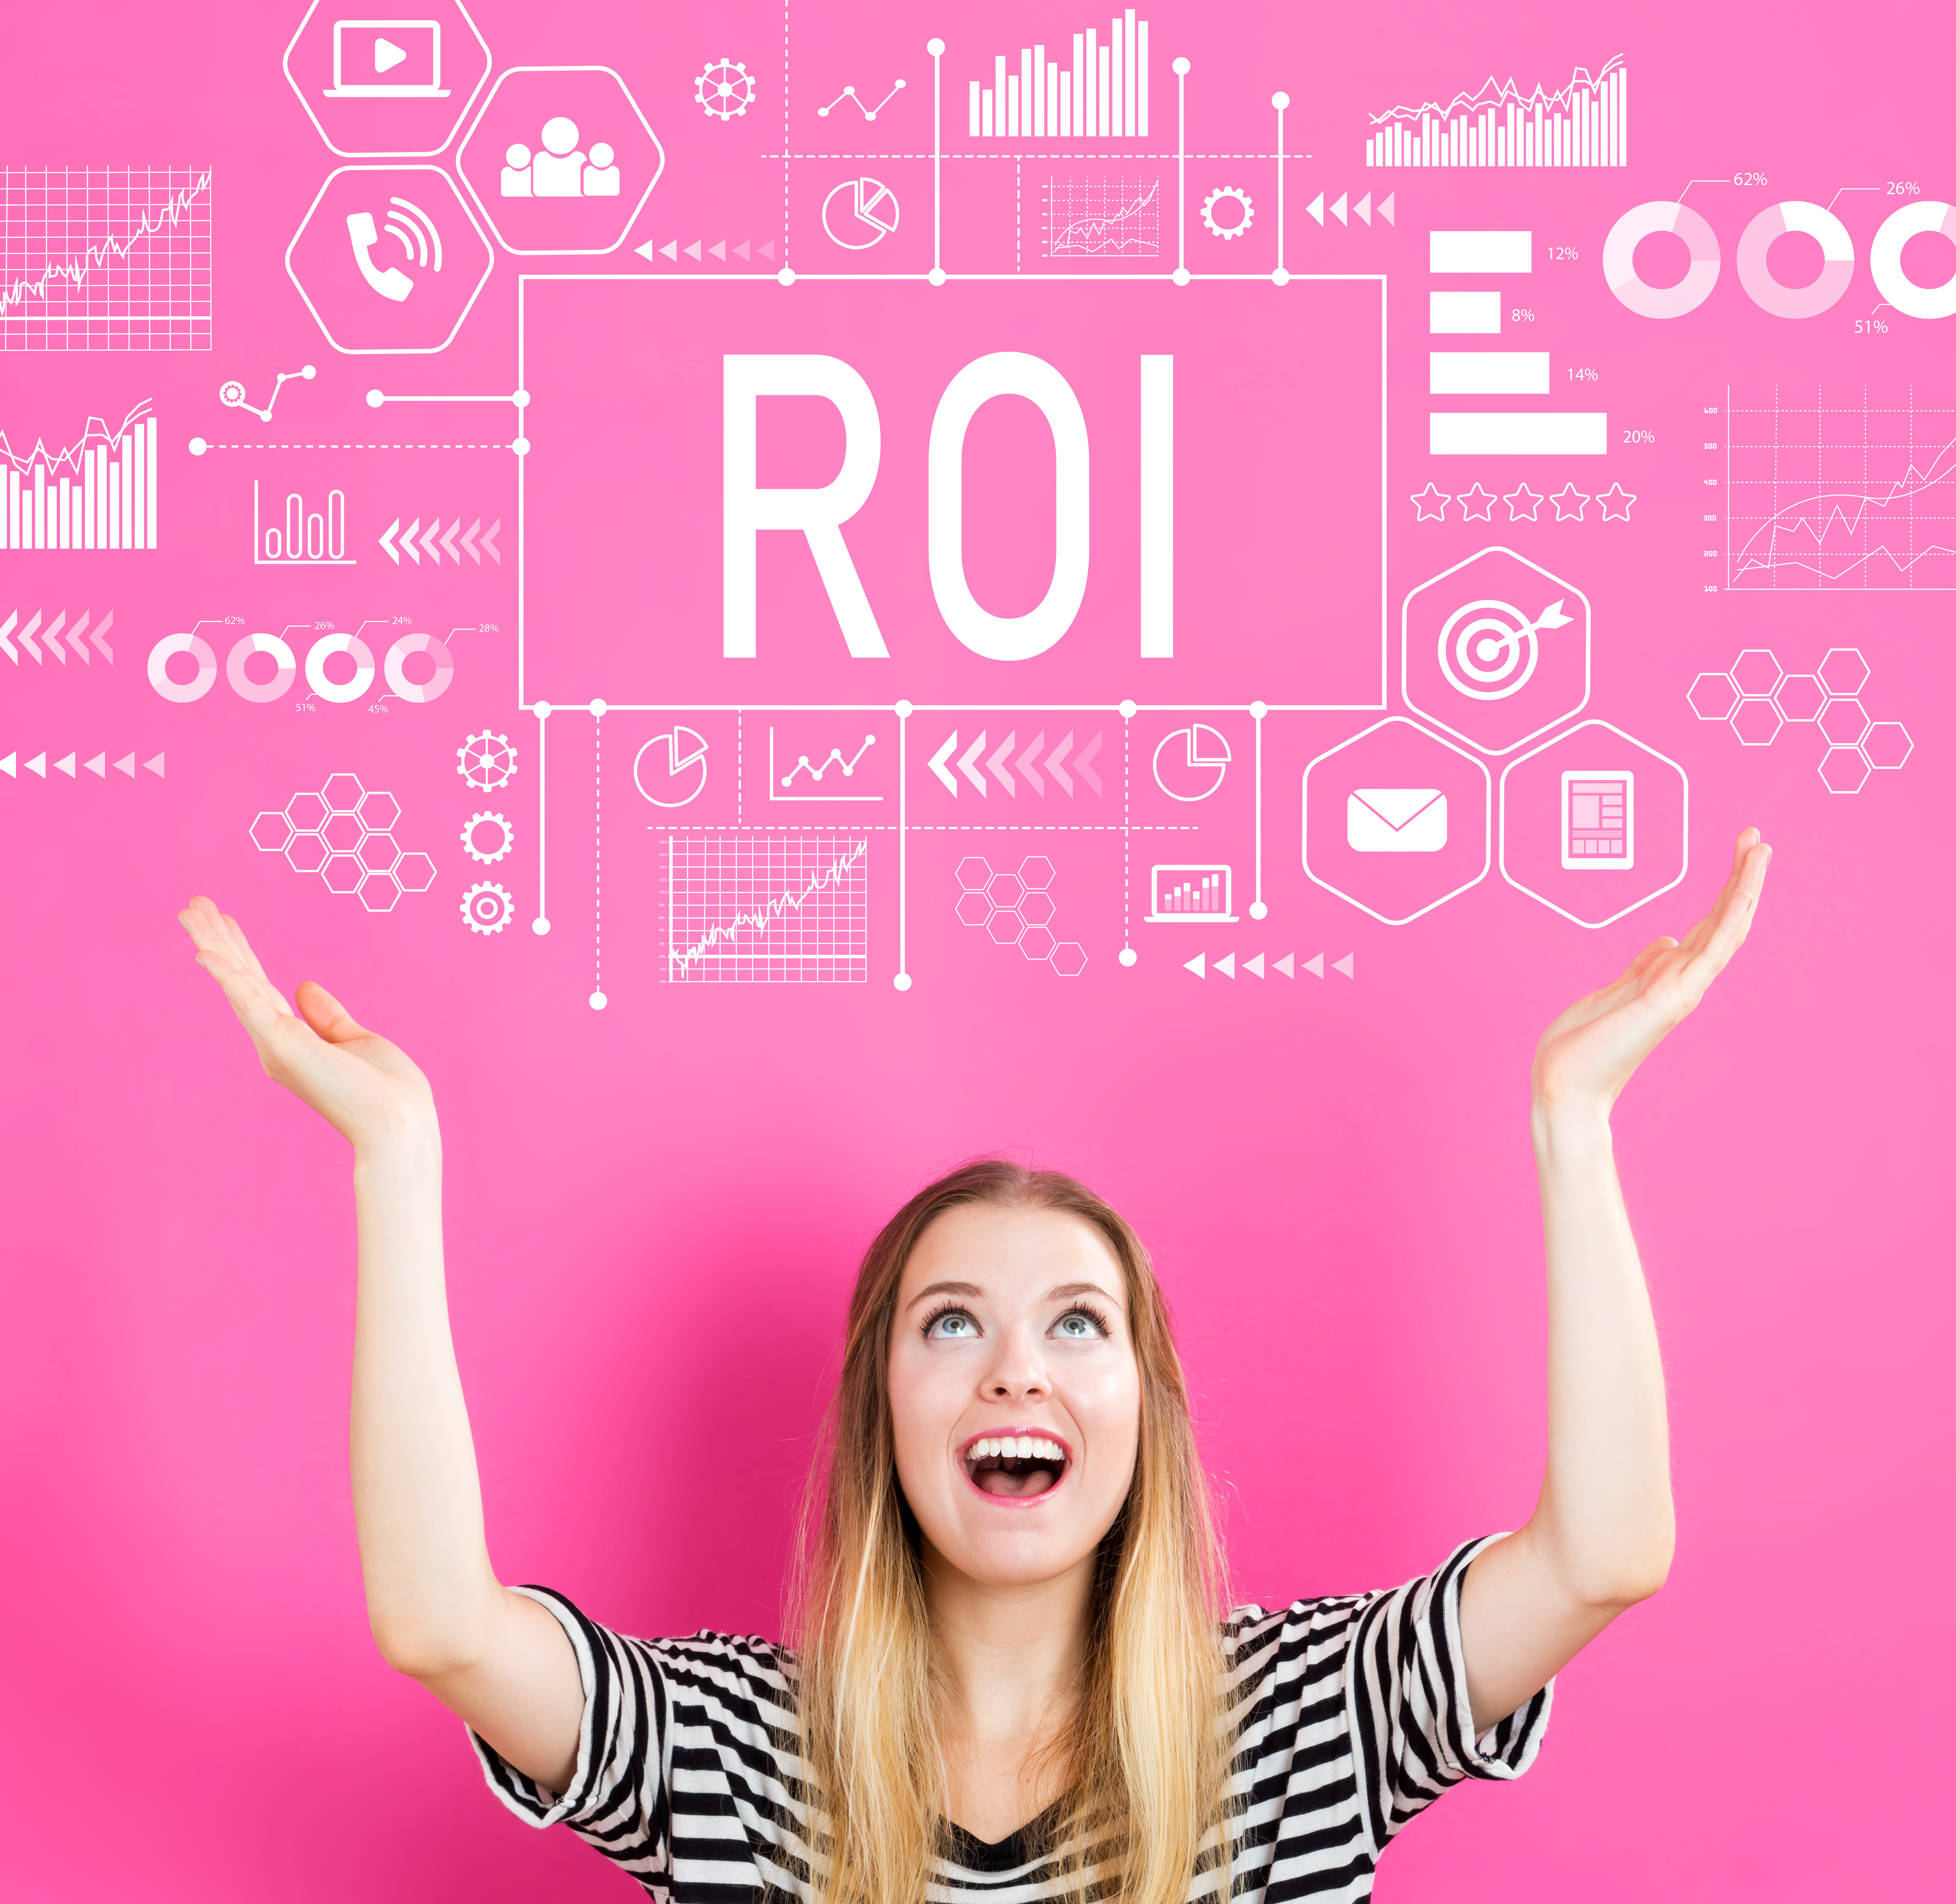 Woman looking up and smiling at ROI graphics above her.